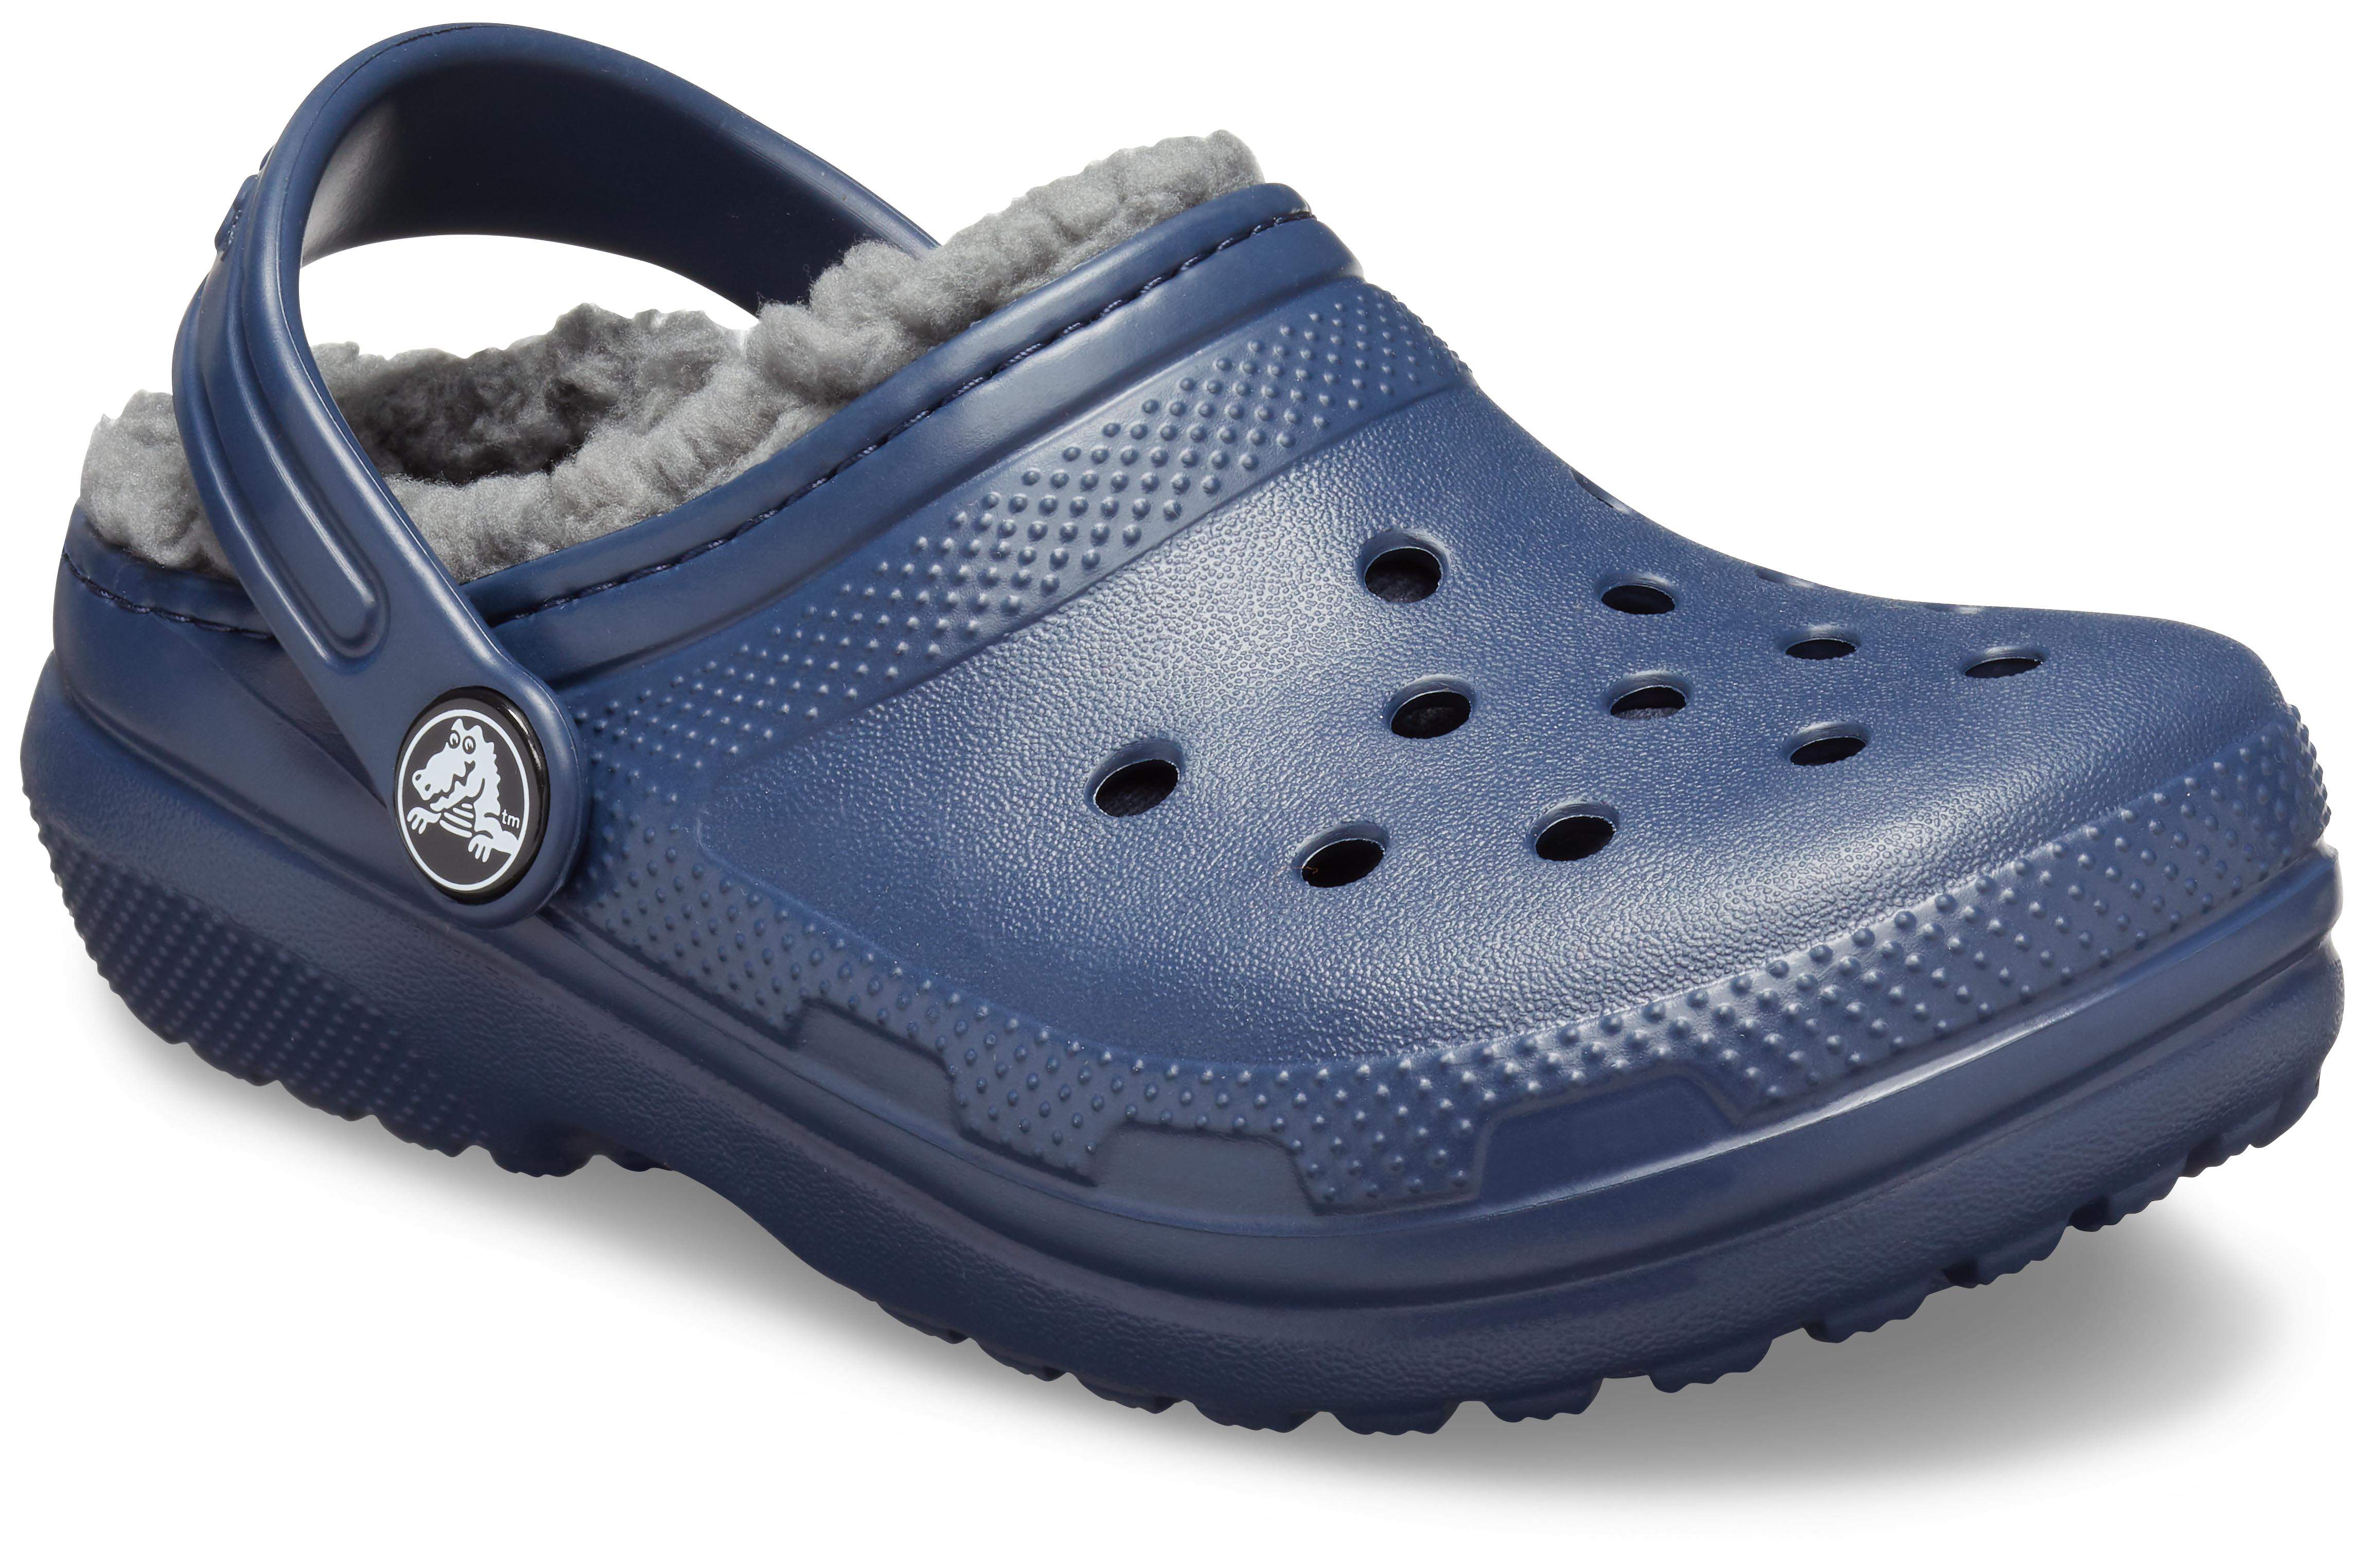 white lined crocs size 7